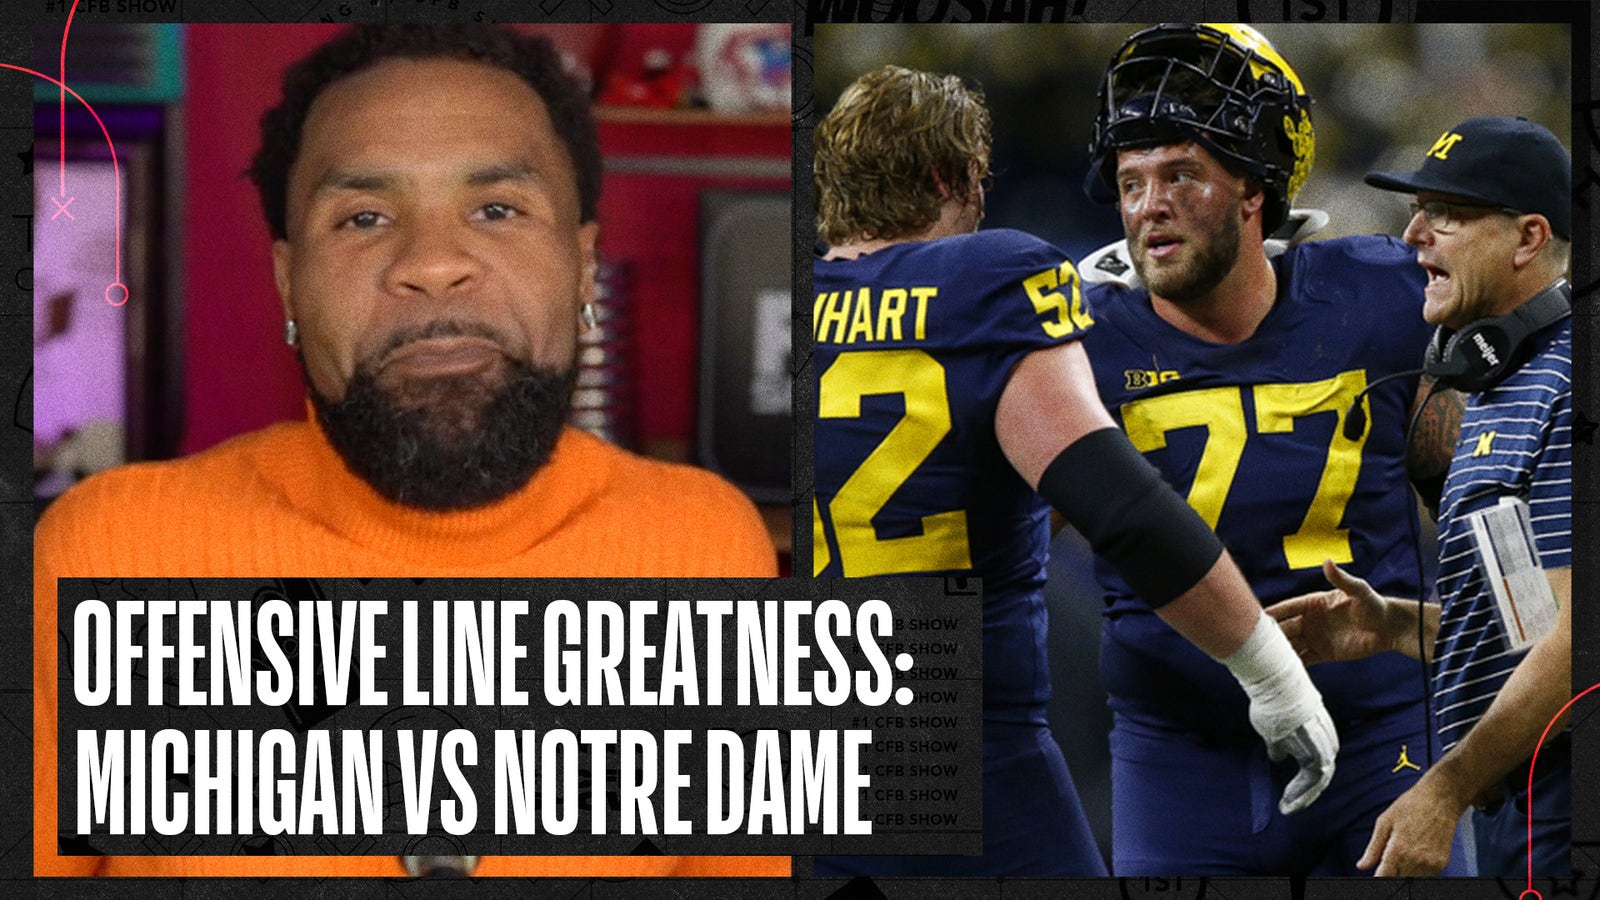 Why Michigan is elite at producing offensive linemen